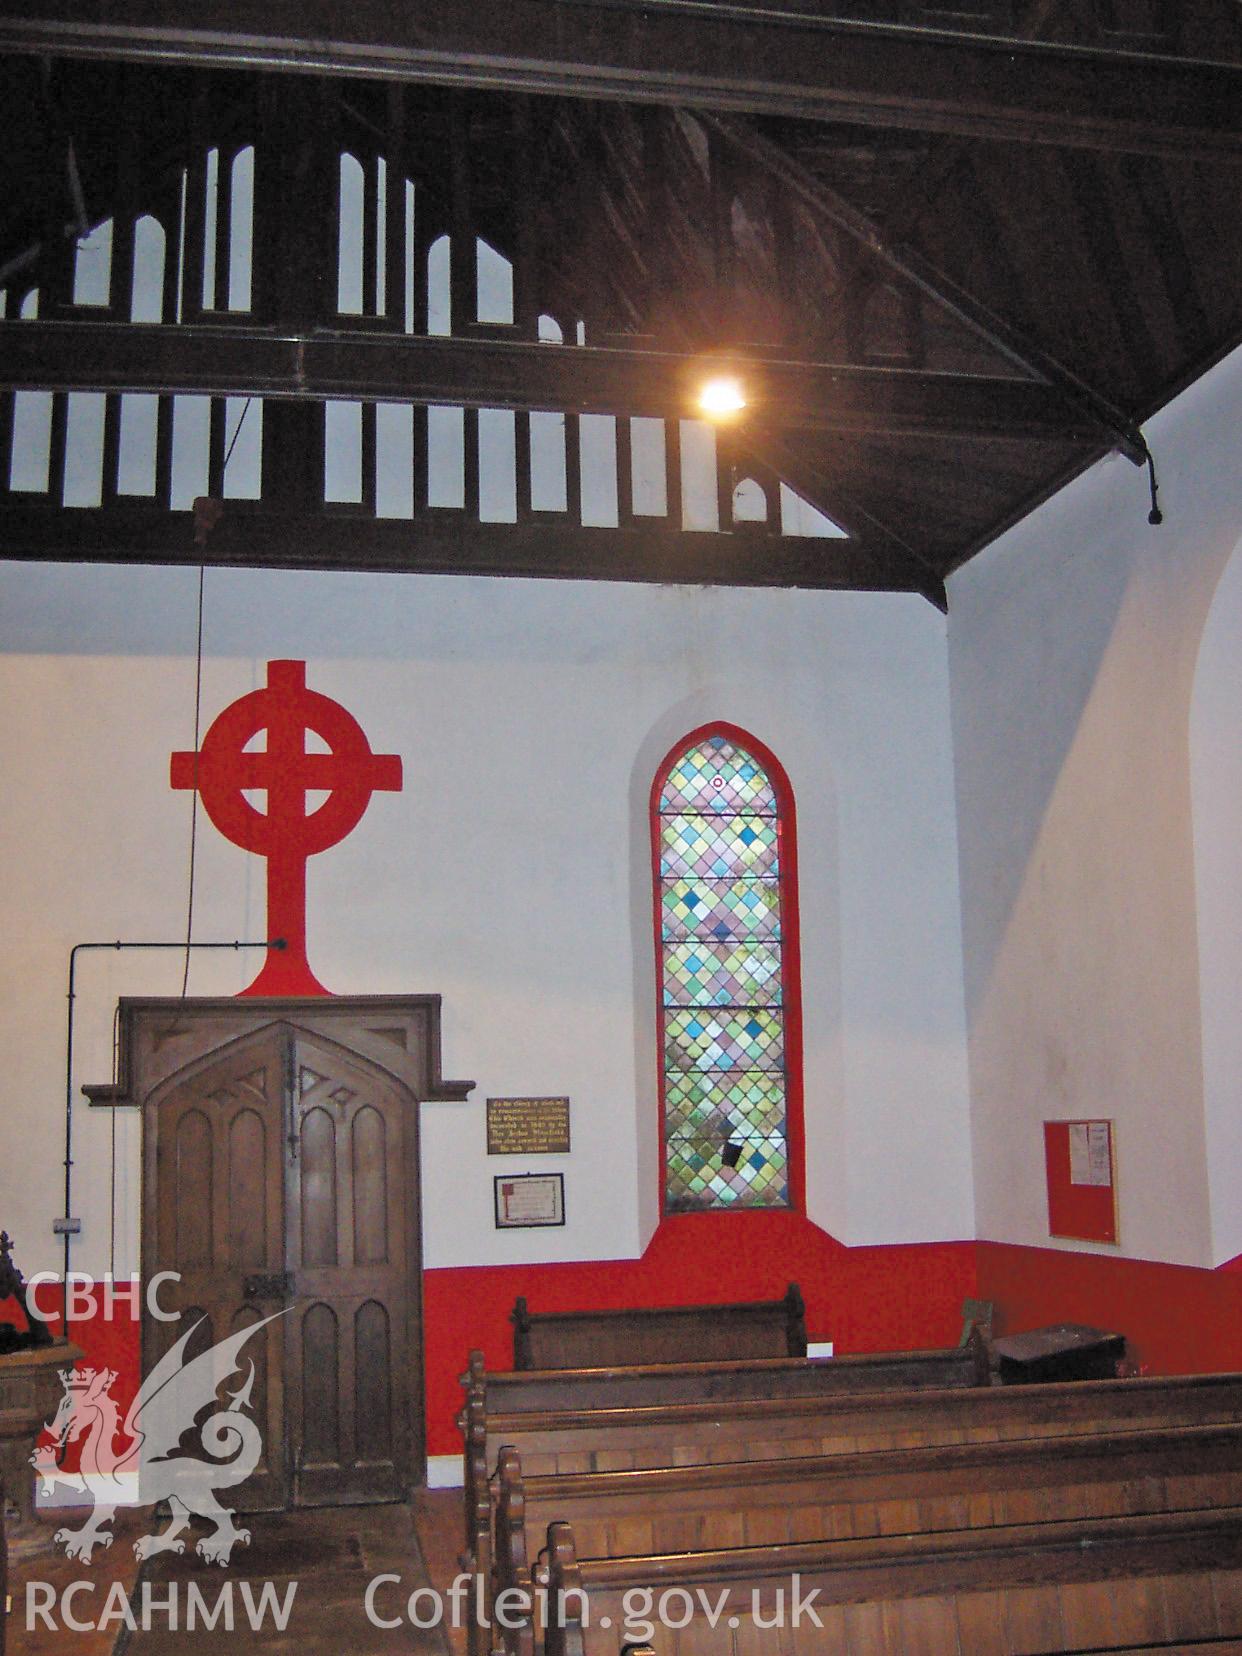 Colour digital photograph showing an interior view of the church entrance.